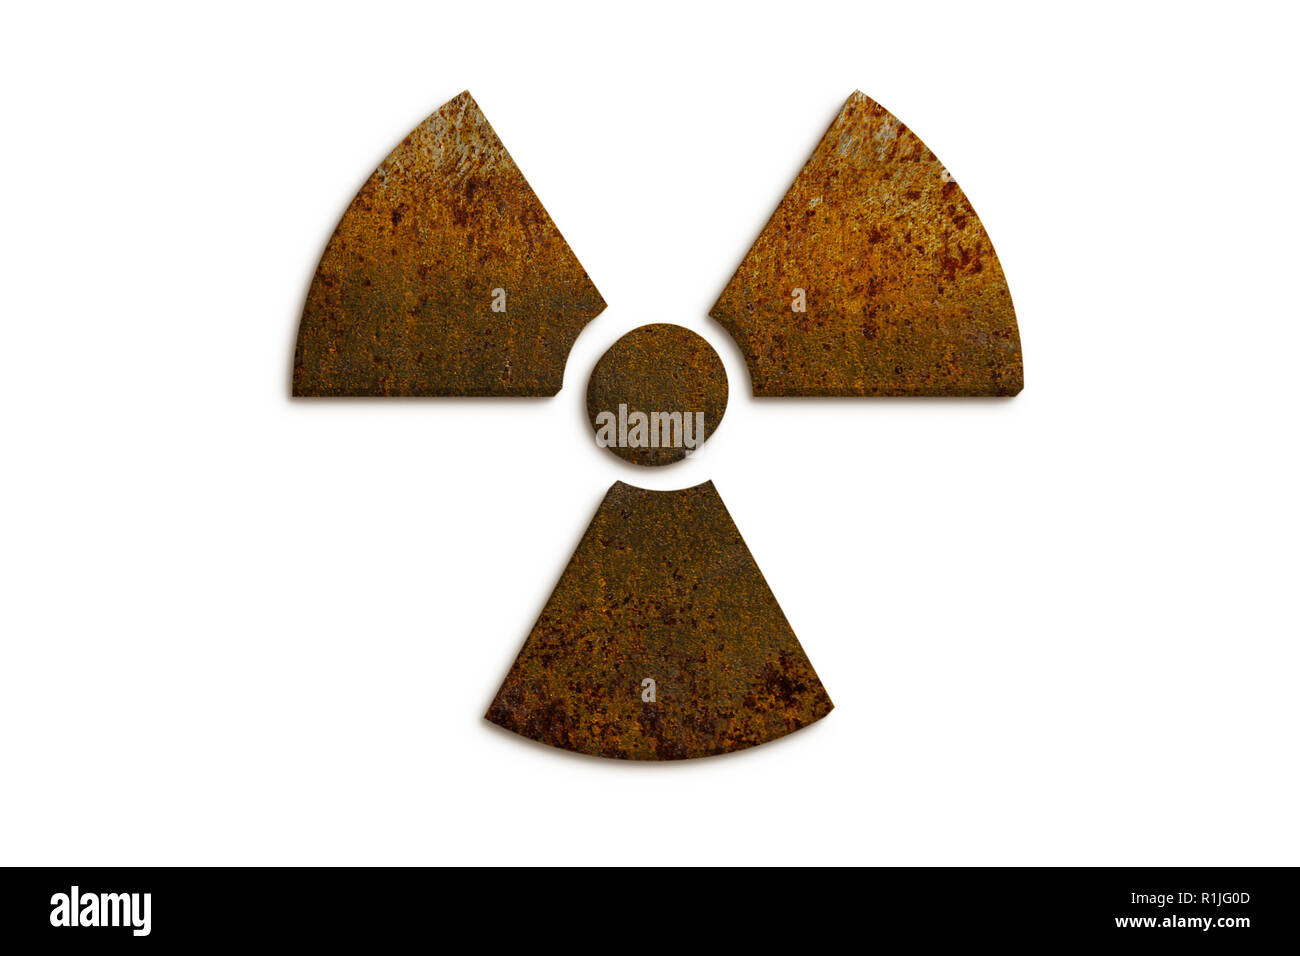 Radioactive (ionizing radiation) nuclear danger symbol constructed of 3D rusty metal grungy texture and isolated on seamless white background. Stock Photo